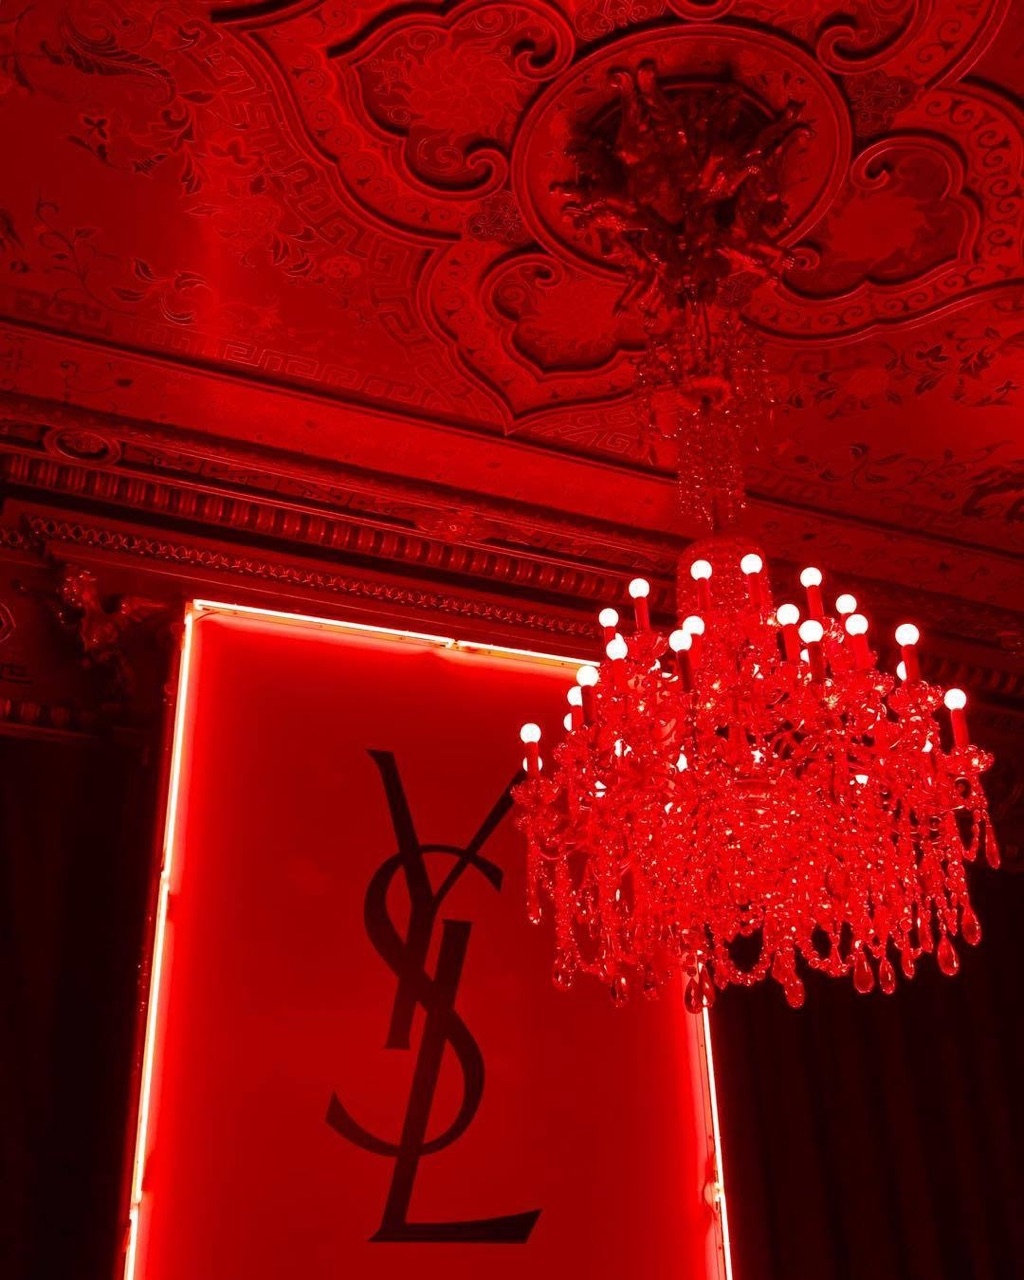 A red chandelier hangs from a red ceiling with a red YSL sign below it. - Light red